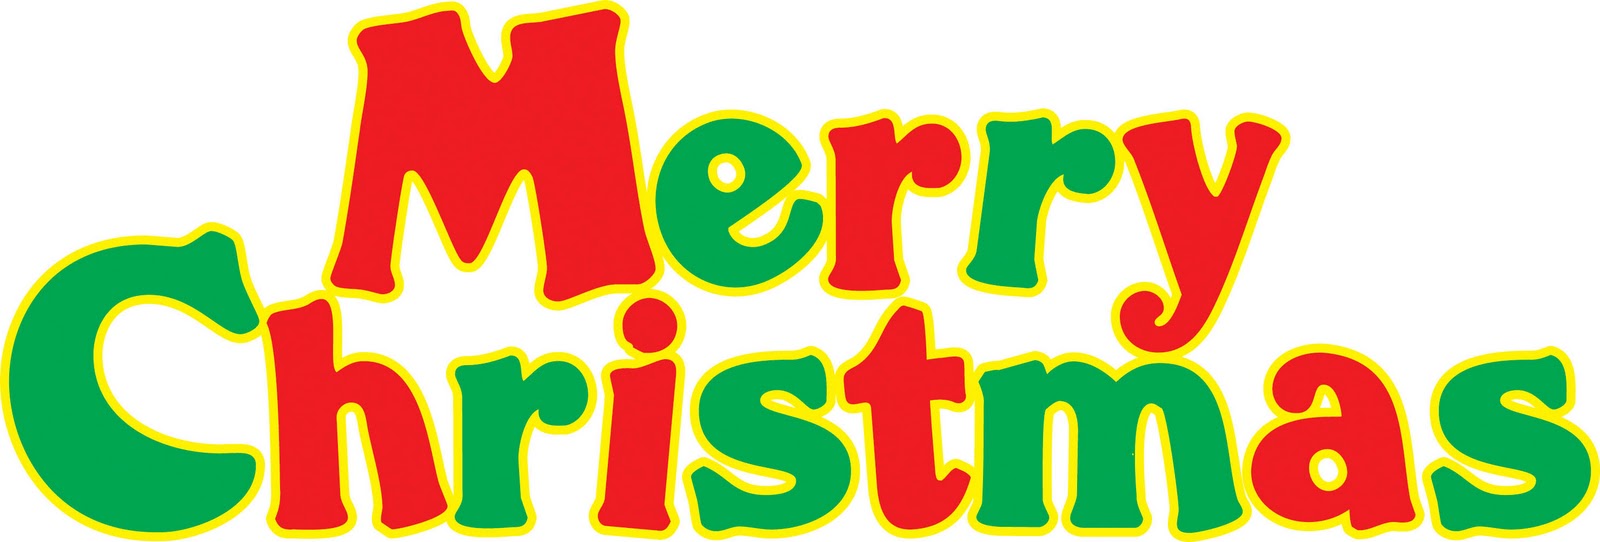 Merry Christmas Clip Art Free Download Clip Art Free